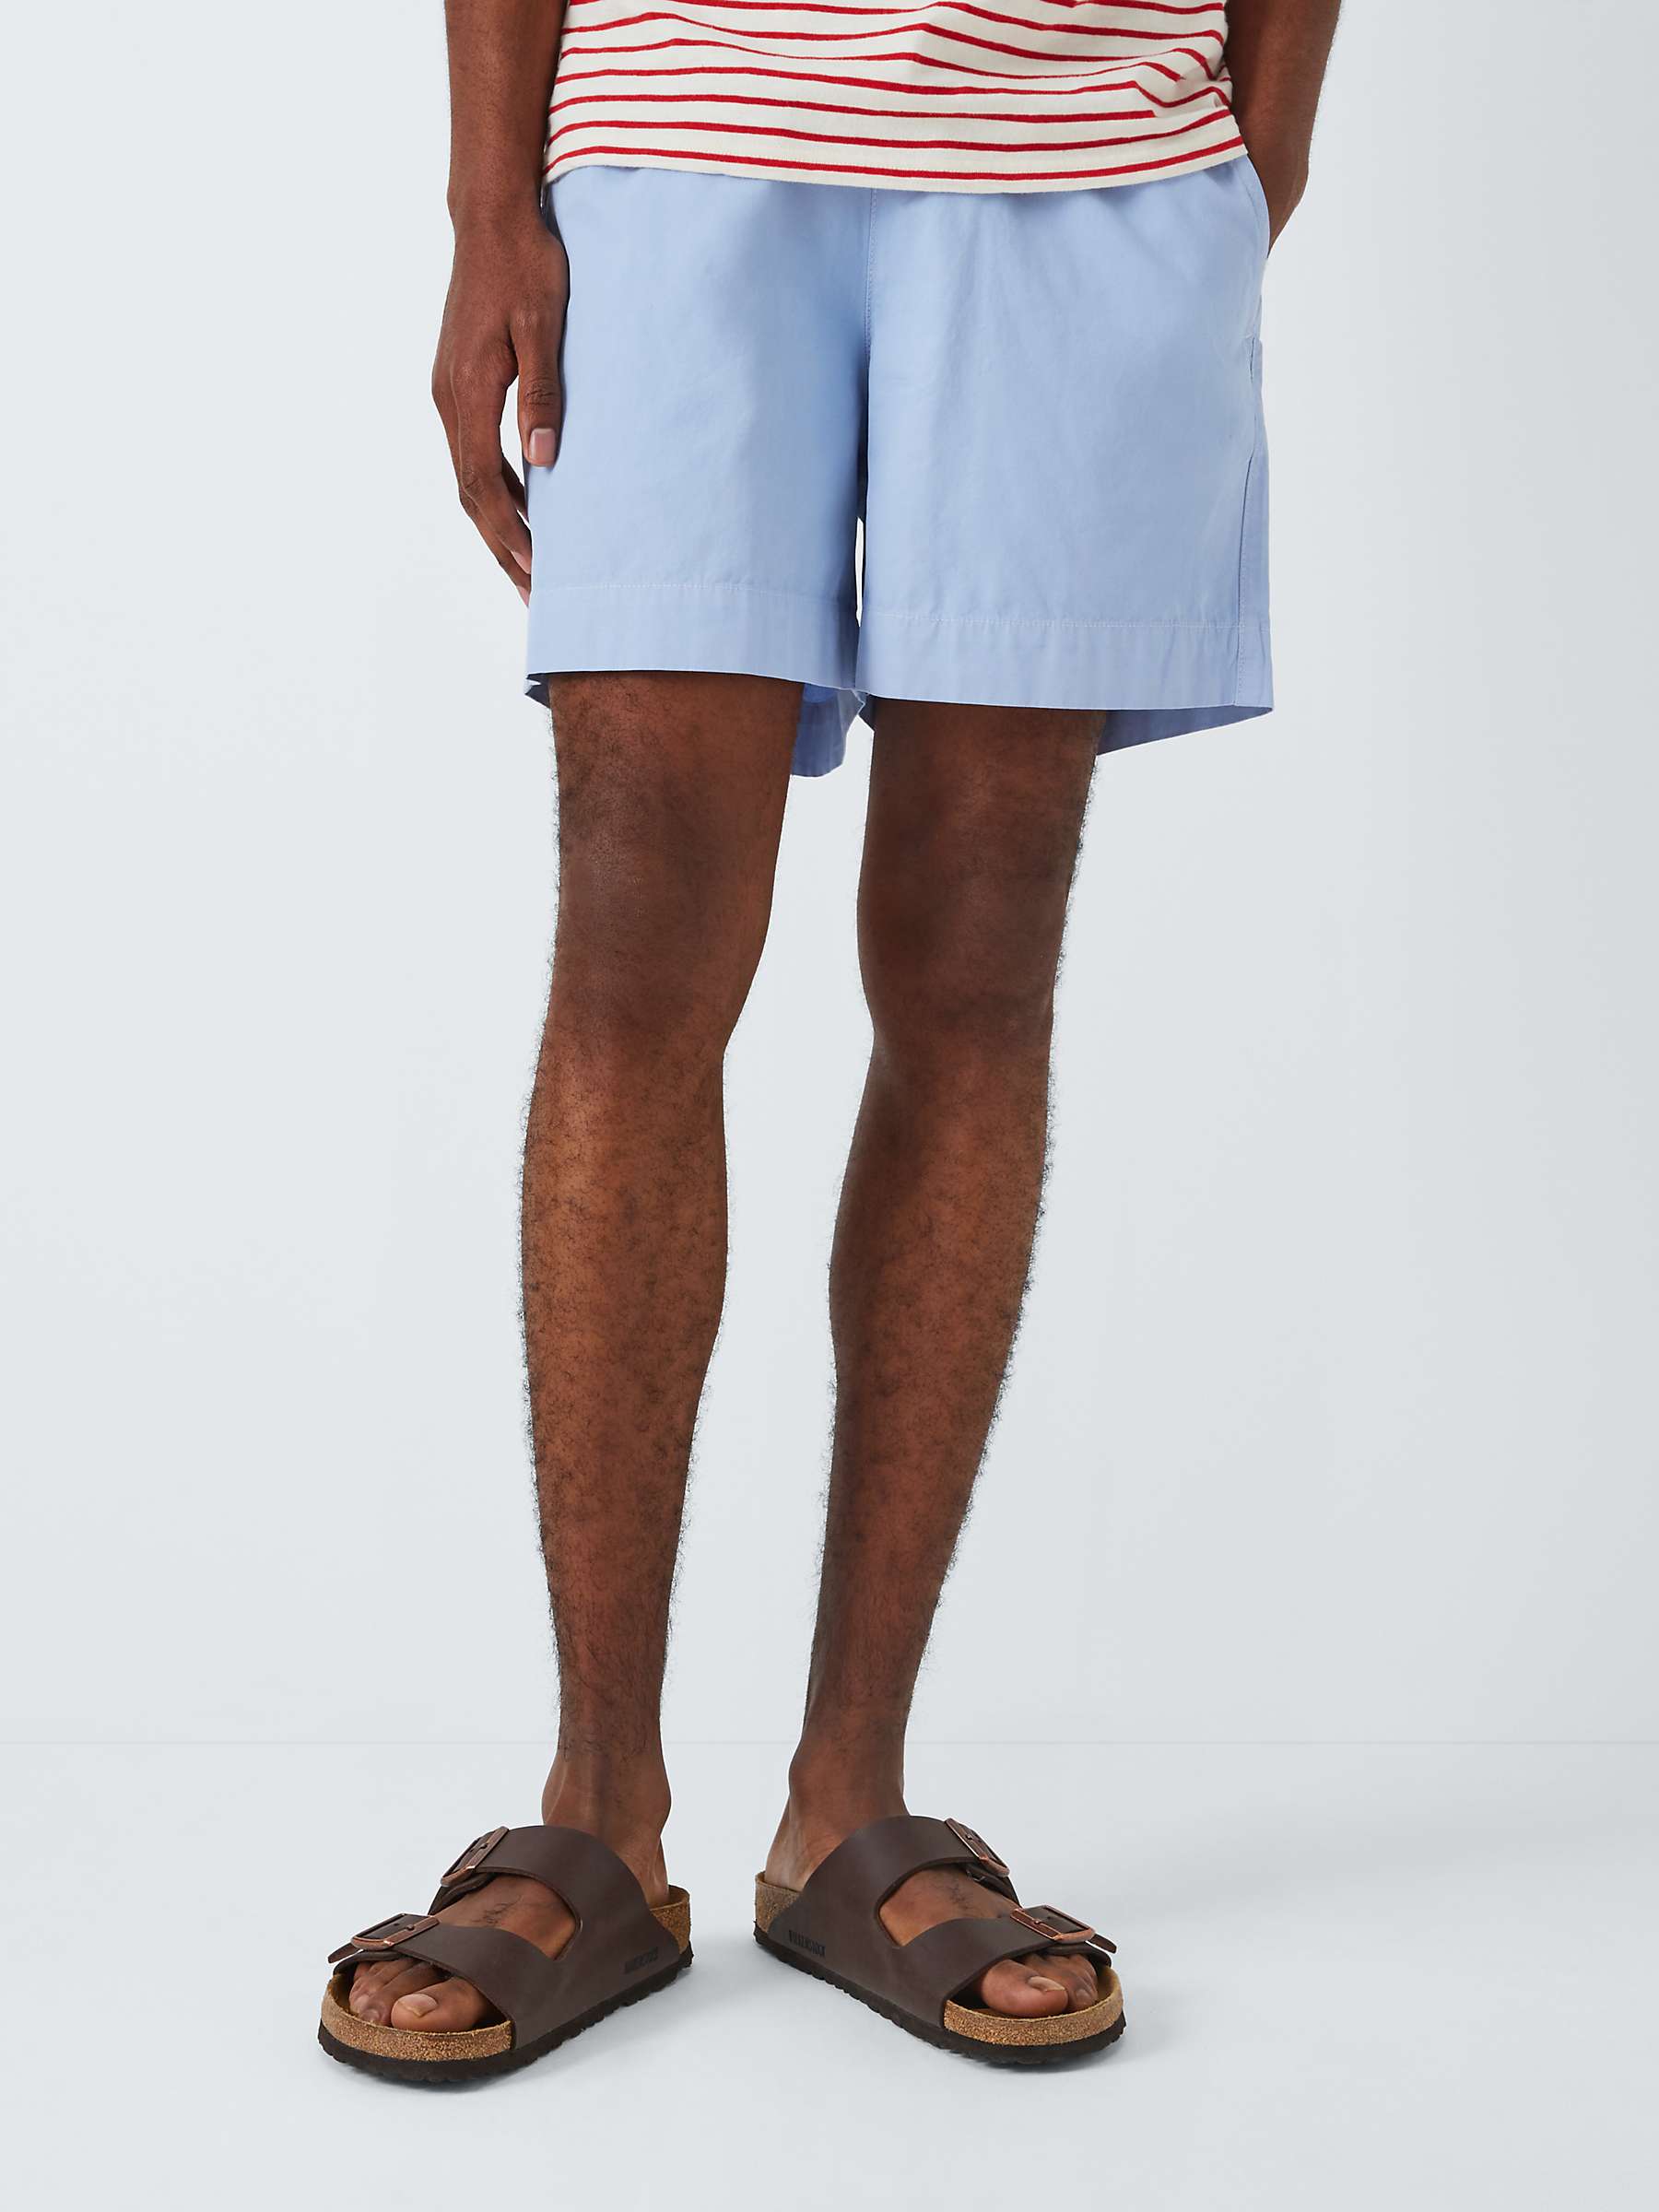 Buy La Paz Relaxed Fit Cotton Shorts, Heather Canvas Online at johnlewis.com